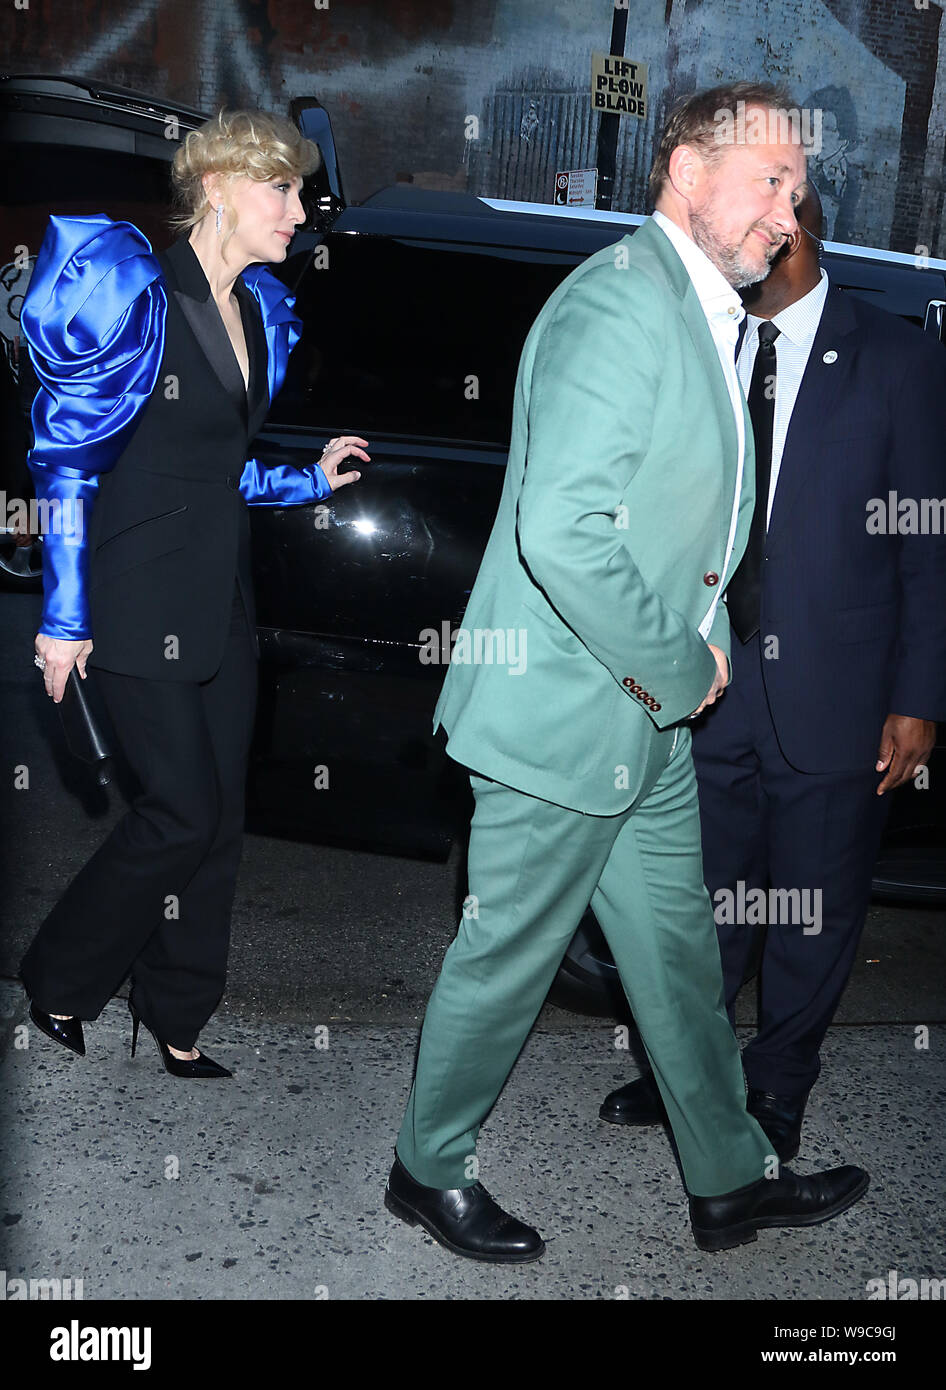 New York, NY, USA. 12th Aug, 2019. Cate Blanchrtt, Andrew Upton, attend UA screening of Where'd You Go Bernadette at the Metrograph in New York. August 12, 2019 Credit: RW/MediaPunch/Alamy Live News Stock Photo